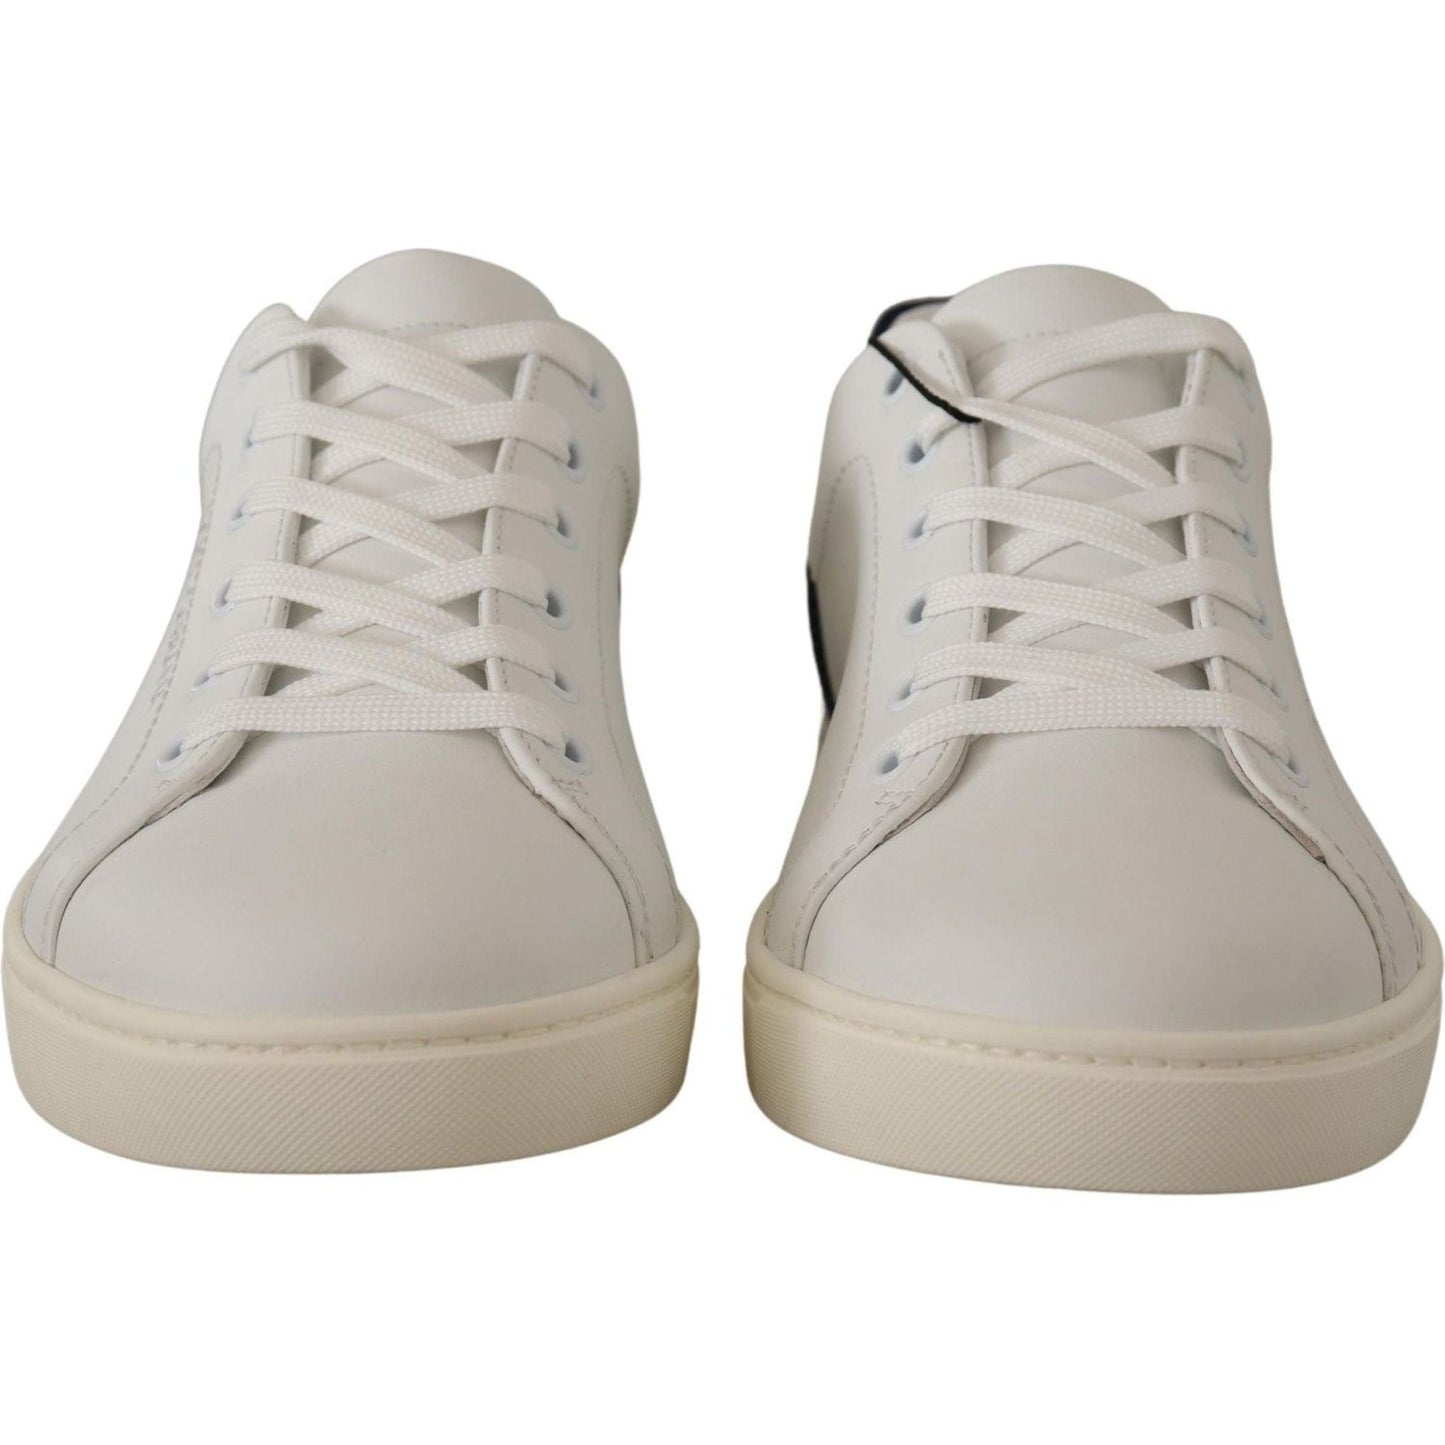 Dolce & Gabbana Elegant White and Blue Low-Top Leather Sneakers white-blue-leather-low-top-sneakers